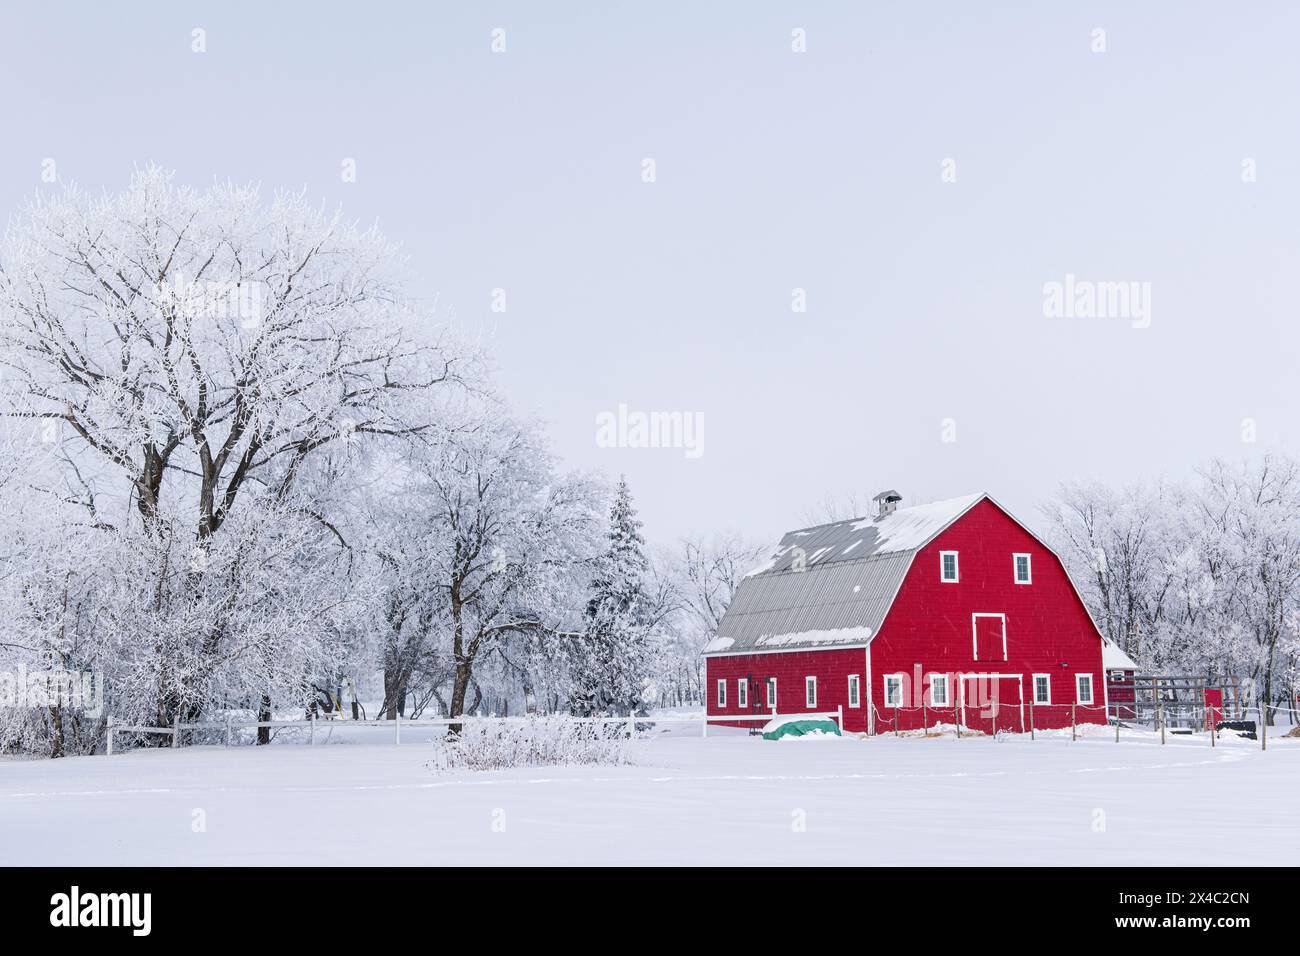 Canada, Manitoba, Grande Pointe. Red barn with rime ice on trees. (Editorial Use Only) Stock Photo